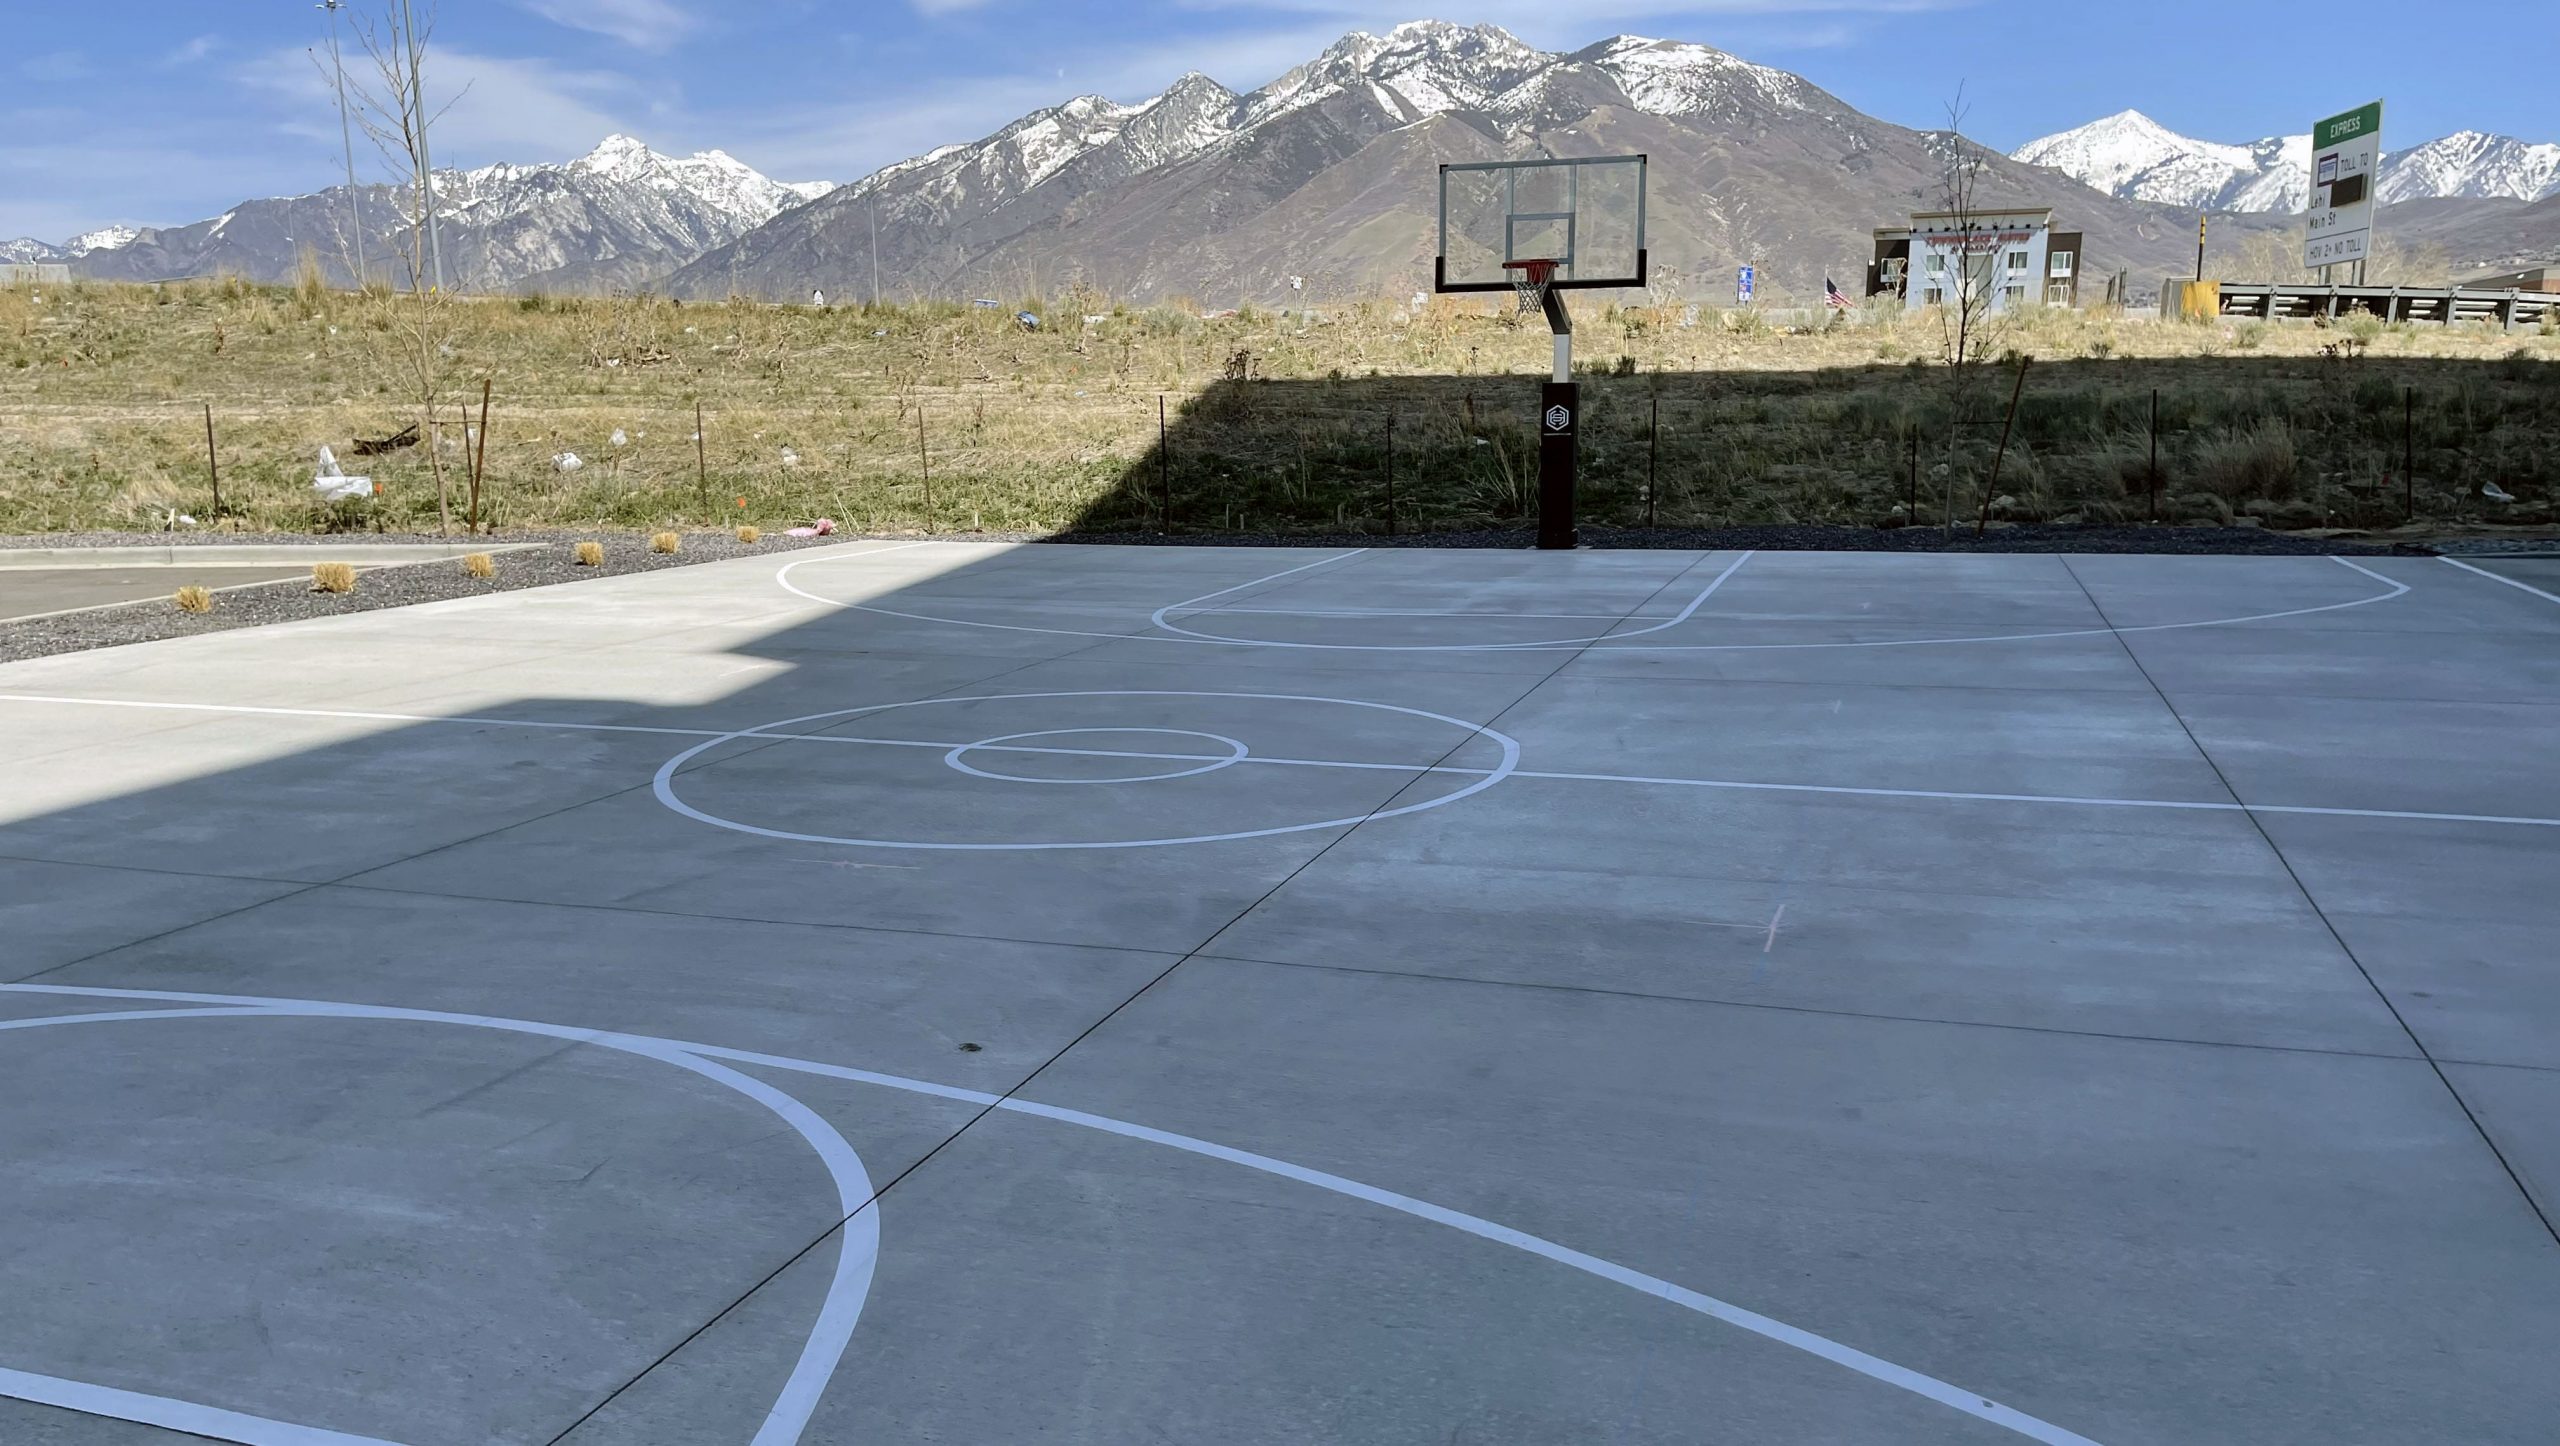 divvy basketball court before new pickleball striping project